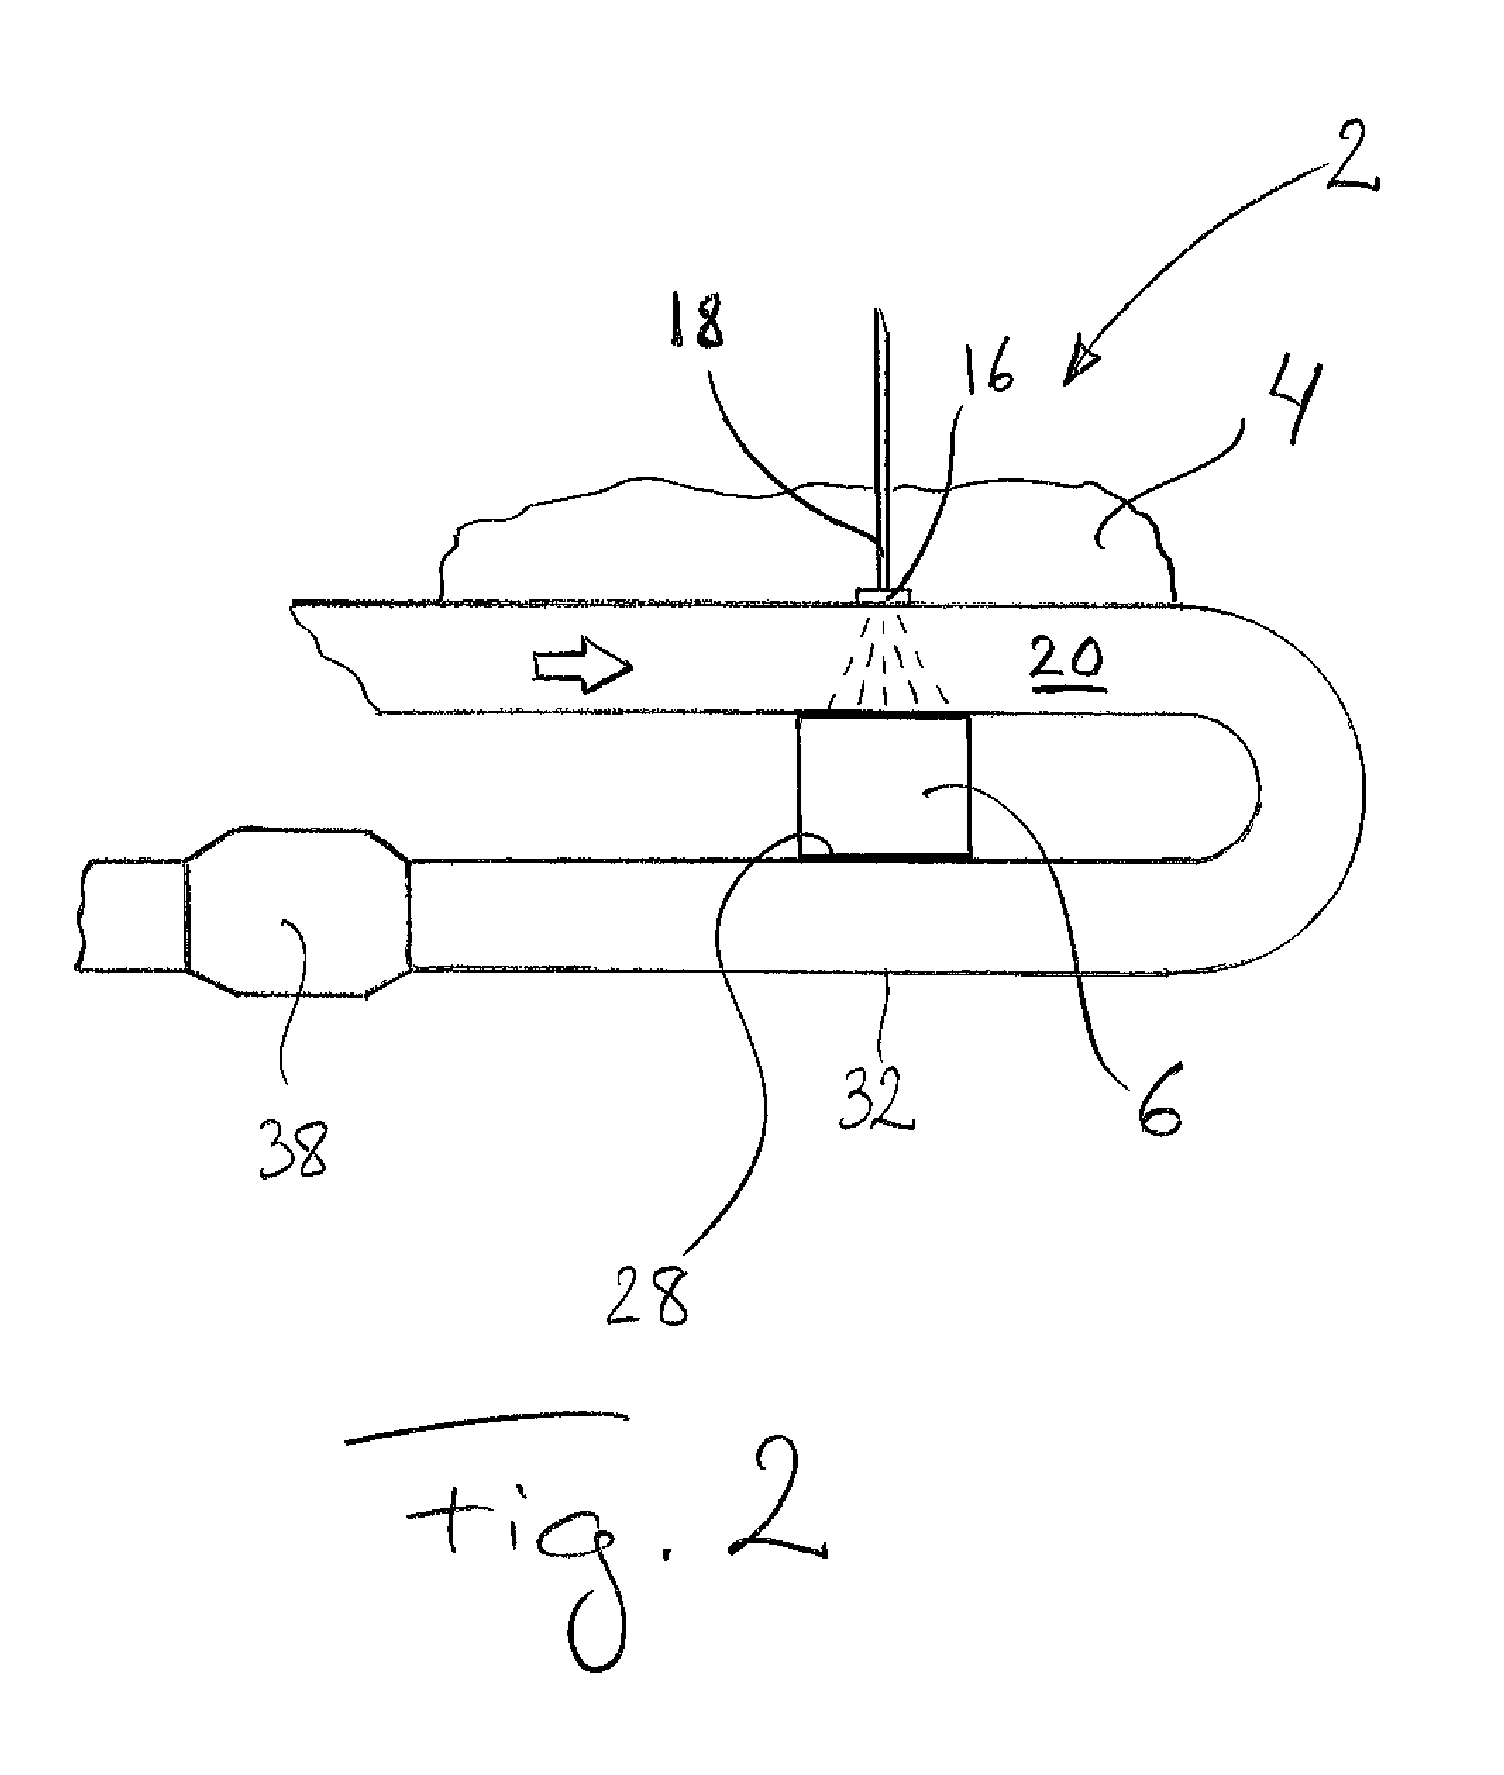 Exhaust post-treatment device and method for a vehicle, with a reductant vaporising surface being warmed by a Peltier element